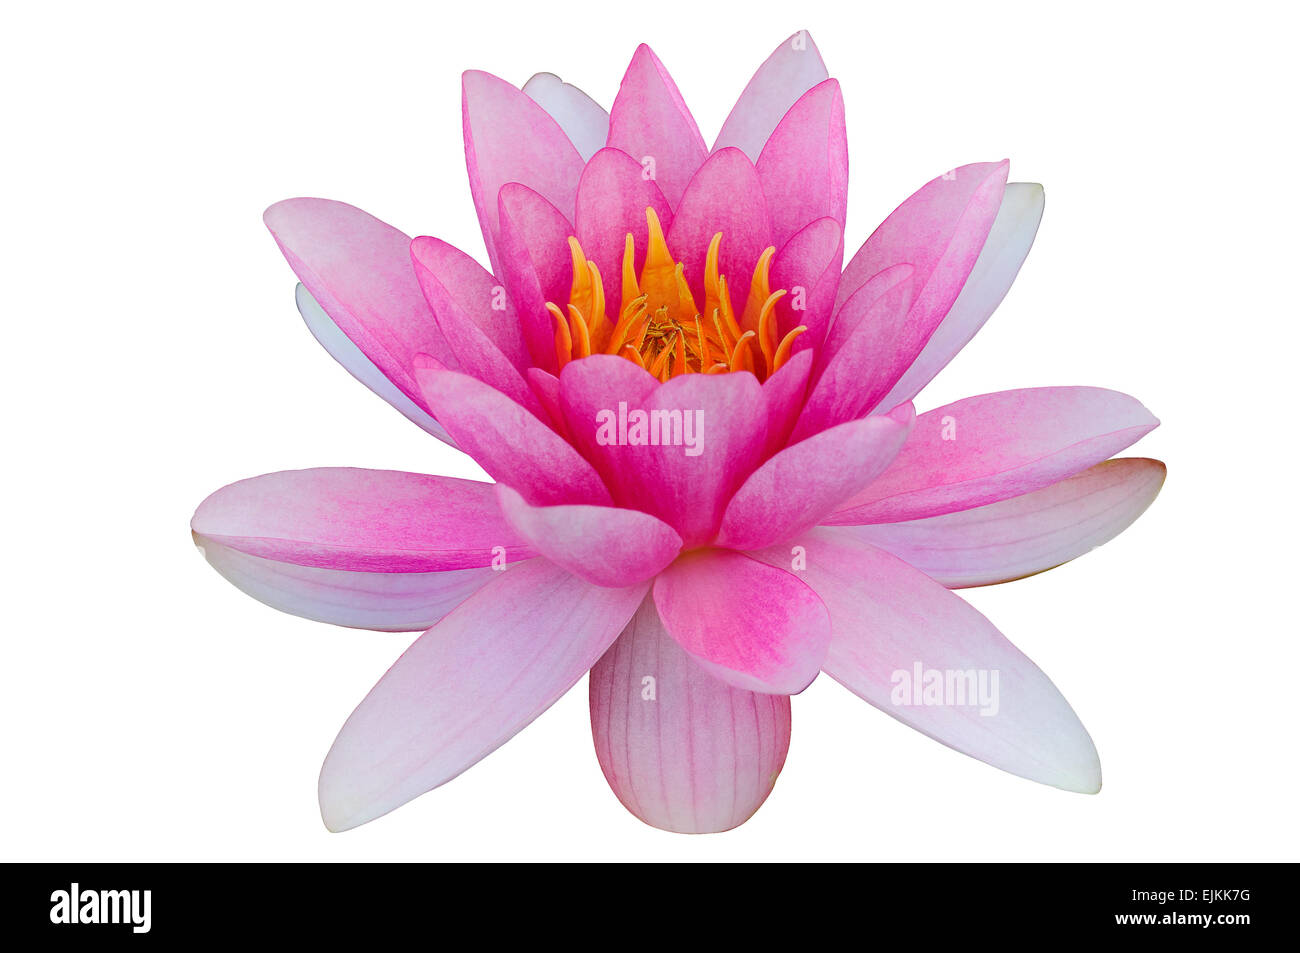 Pink water lily white background clip art clipping path Stock Photo